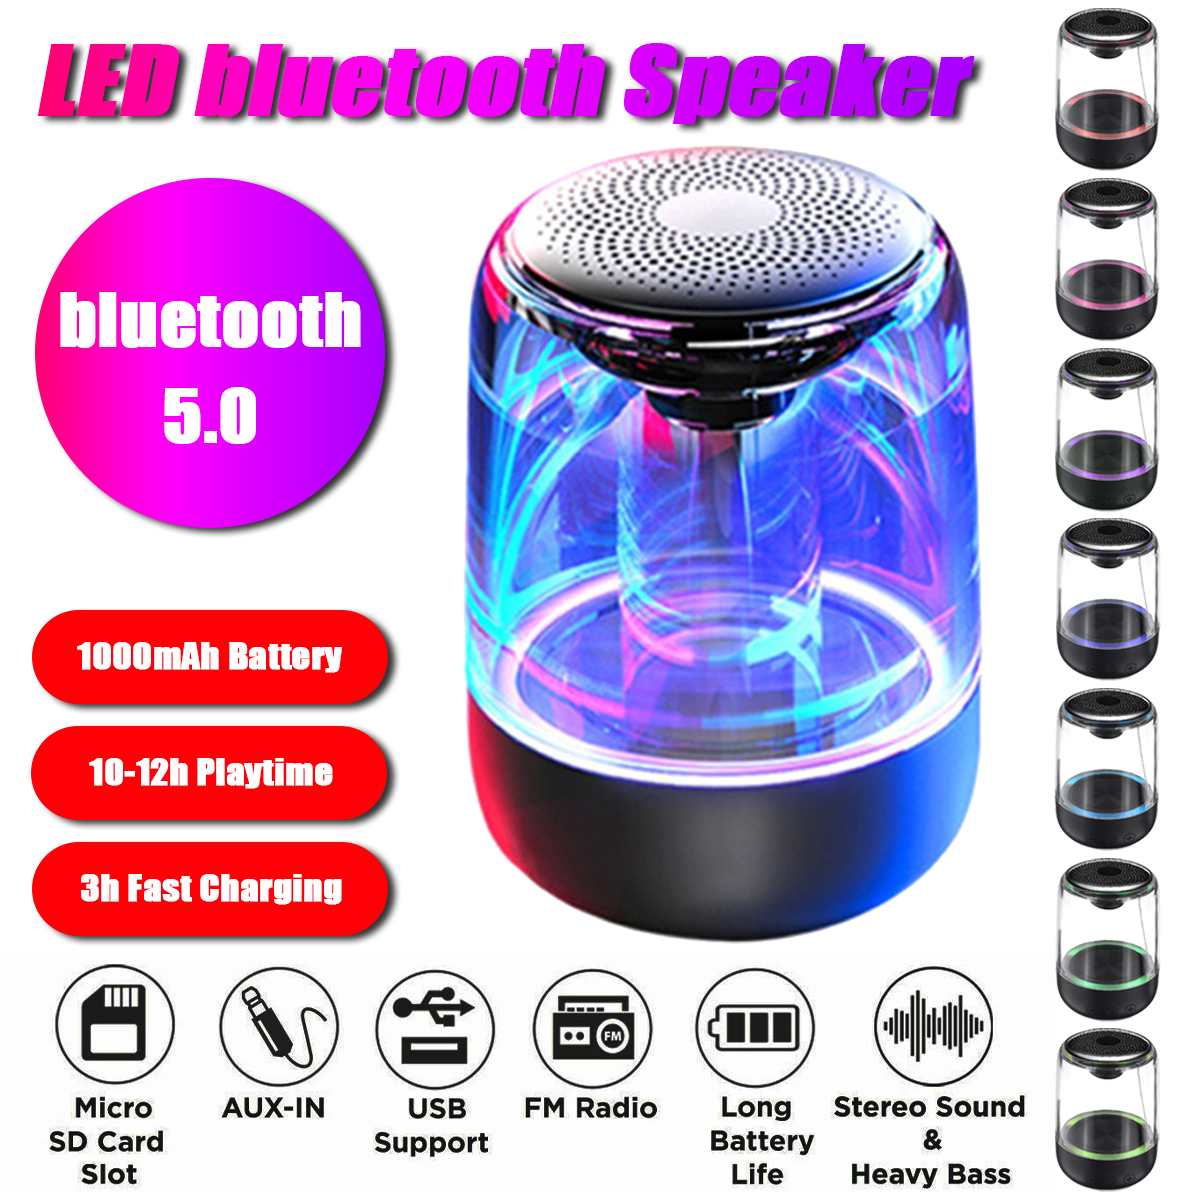 Bluetooth Wireless Speakers Waterproof Stereo Column Portable Subwoofer Speaker Romantic Colorful Light Support TF Card with Mic